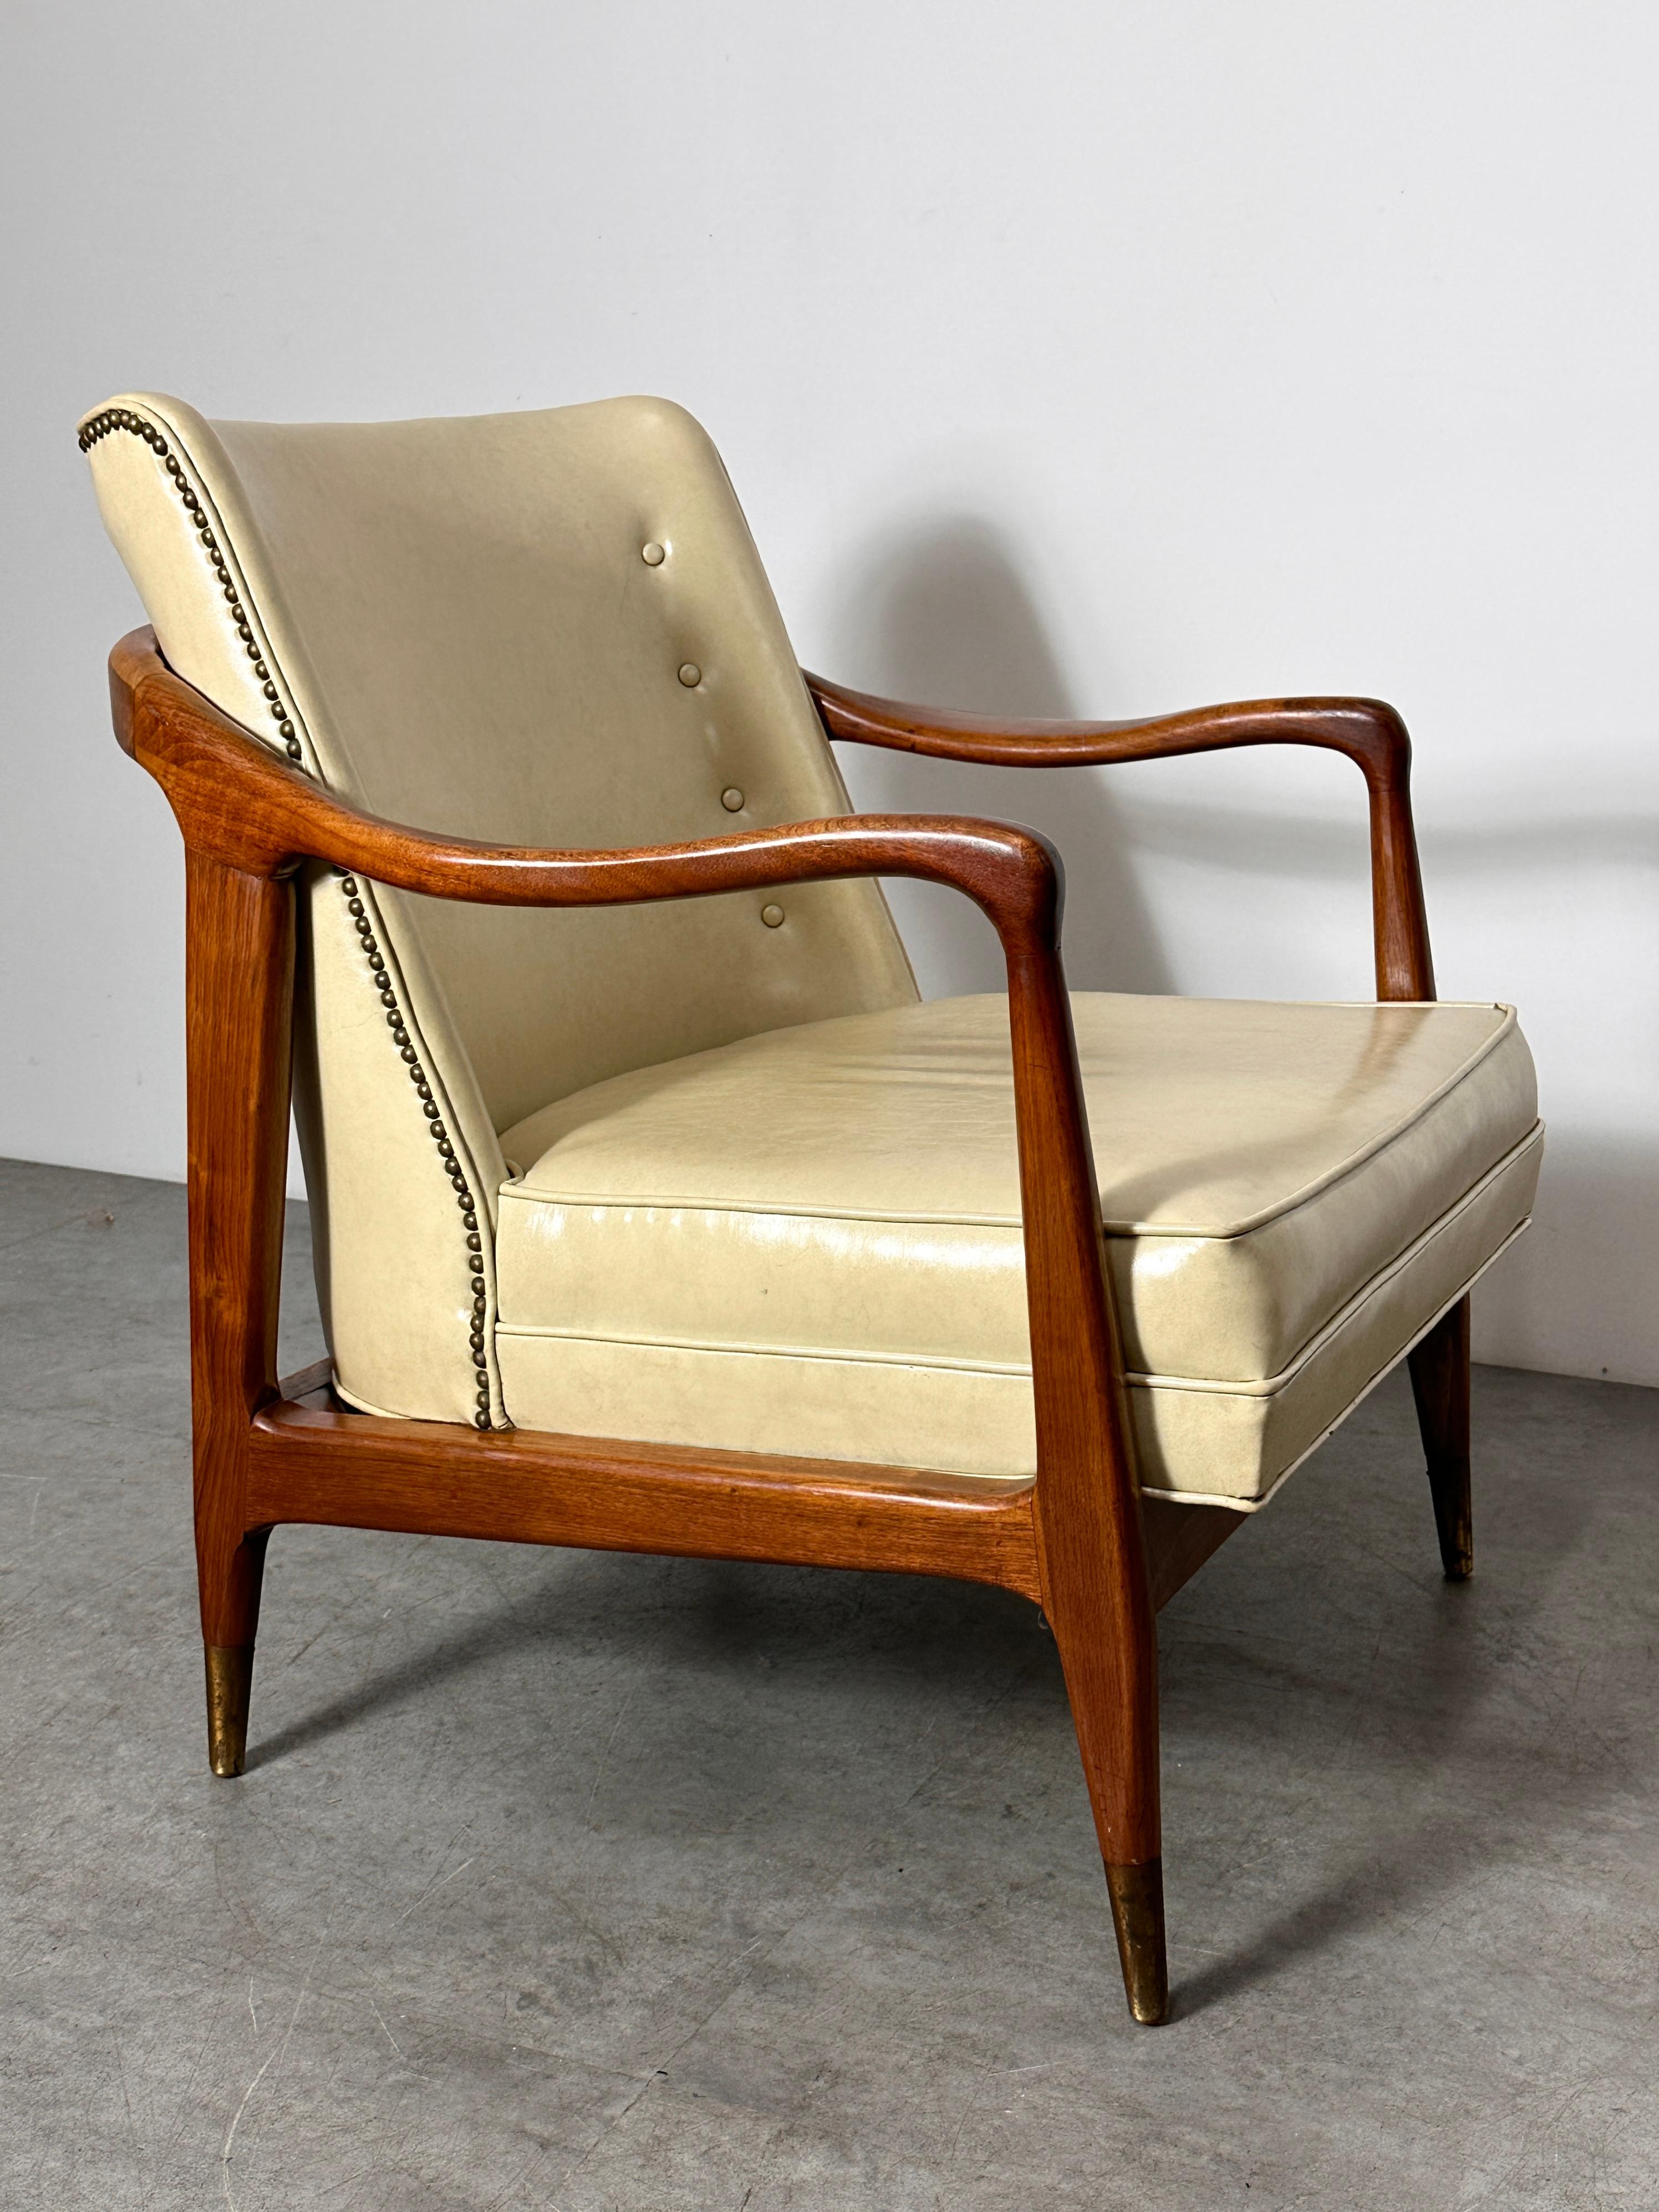 Mid Century Sculptural Walnut Brass Lounge Chair Gio Ponti Style 1950s For Sale 4